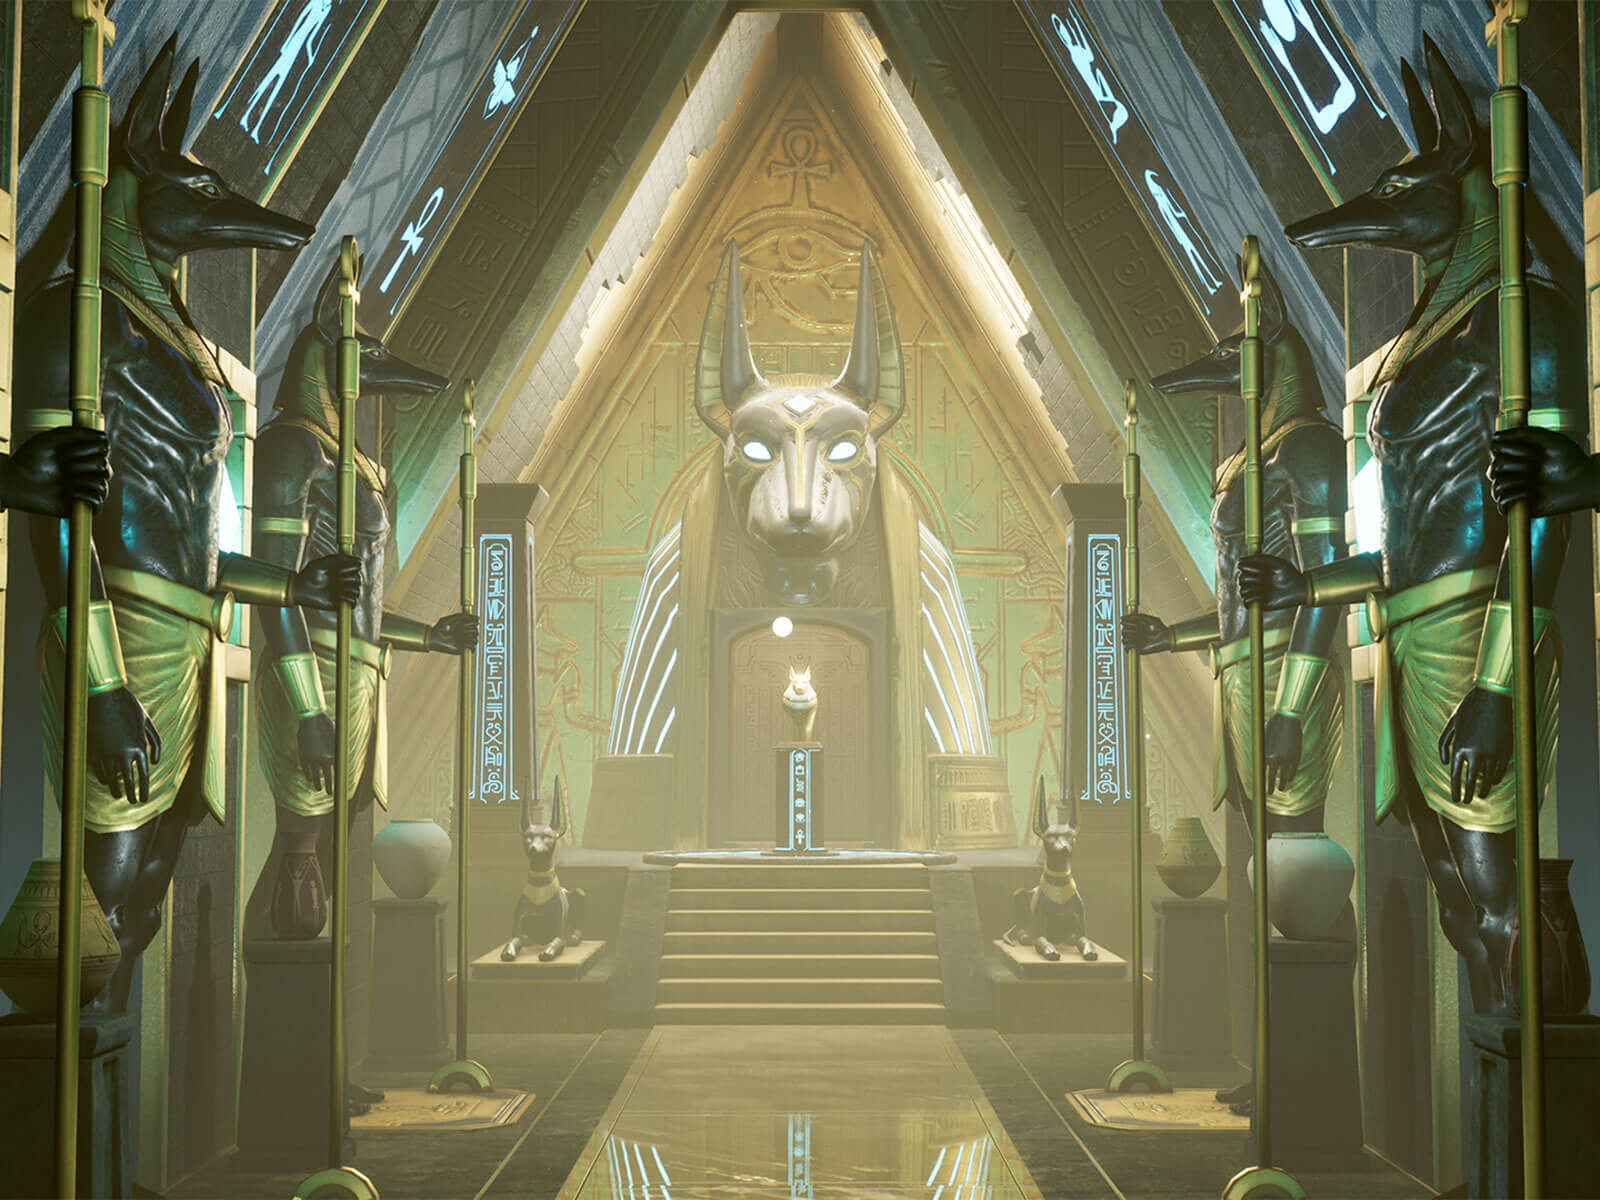 An ornate chamber adorned with Anubis statues and jackal imagery.